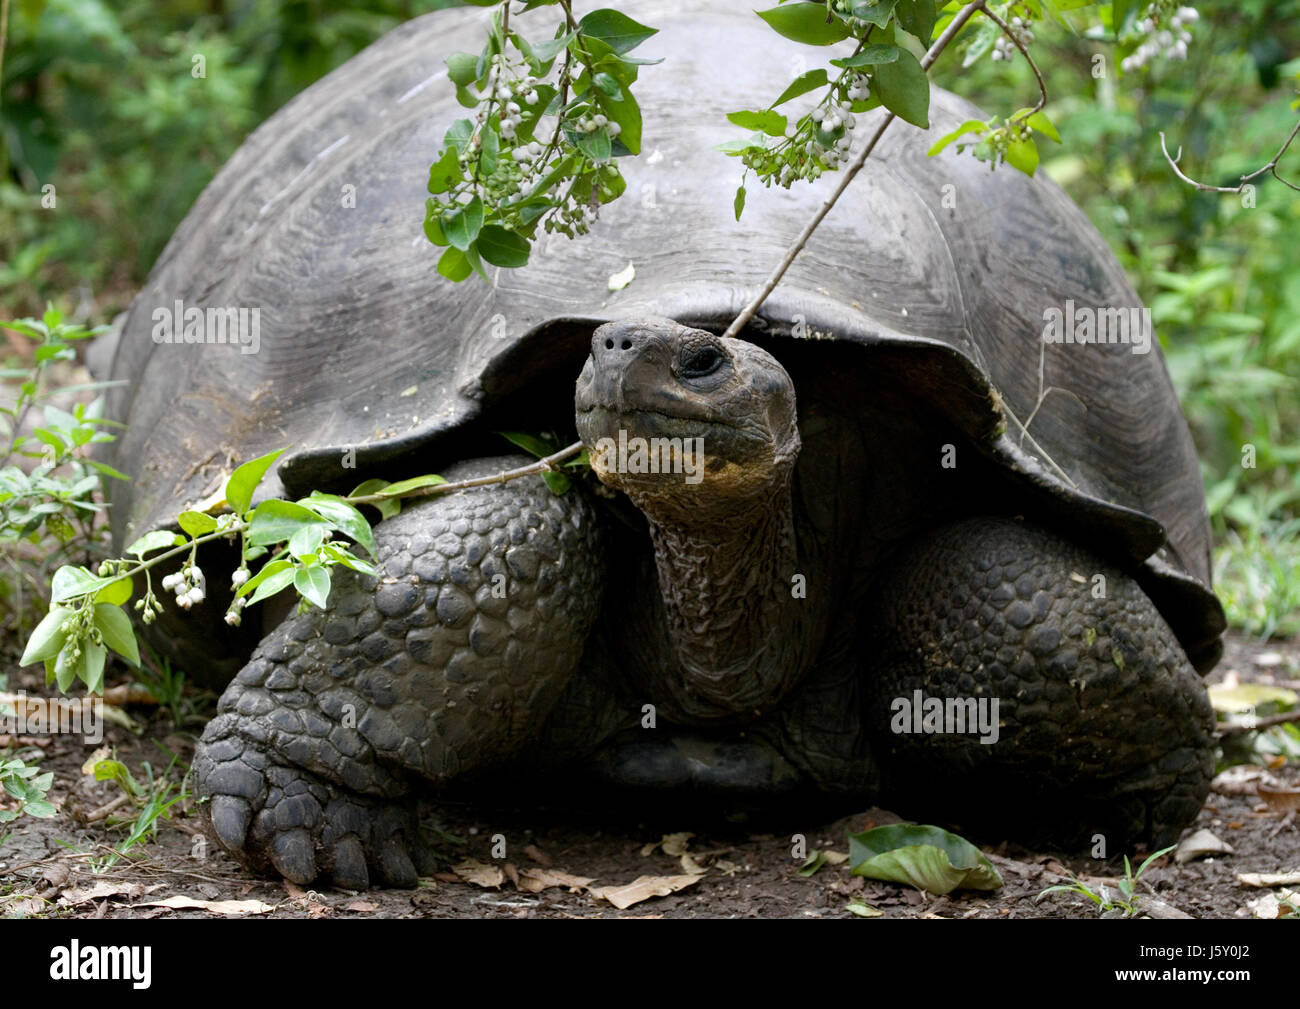 The giant turtle in the grass. The Galapagos Islands. Pacific Ocean. Ecuador. Stock Photo